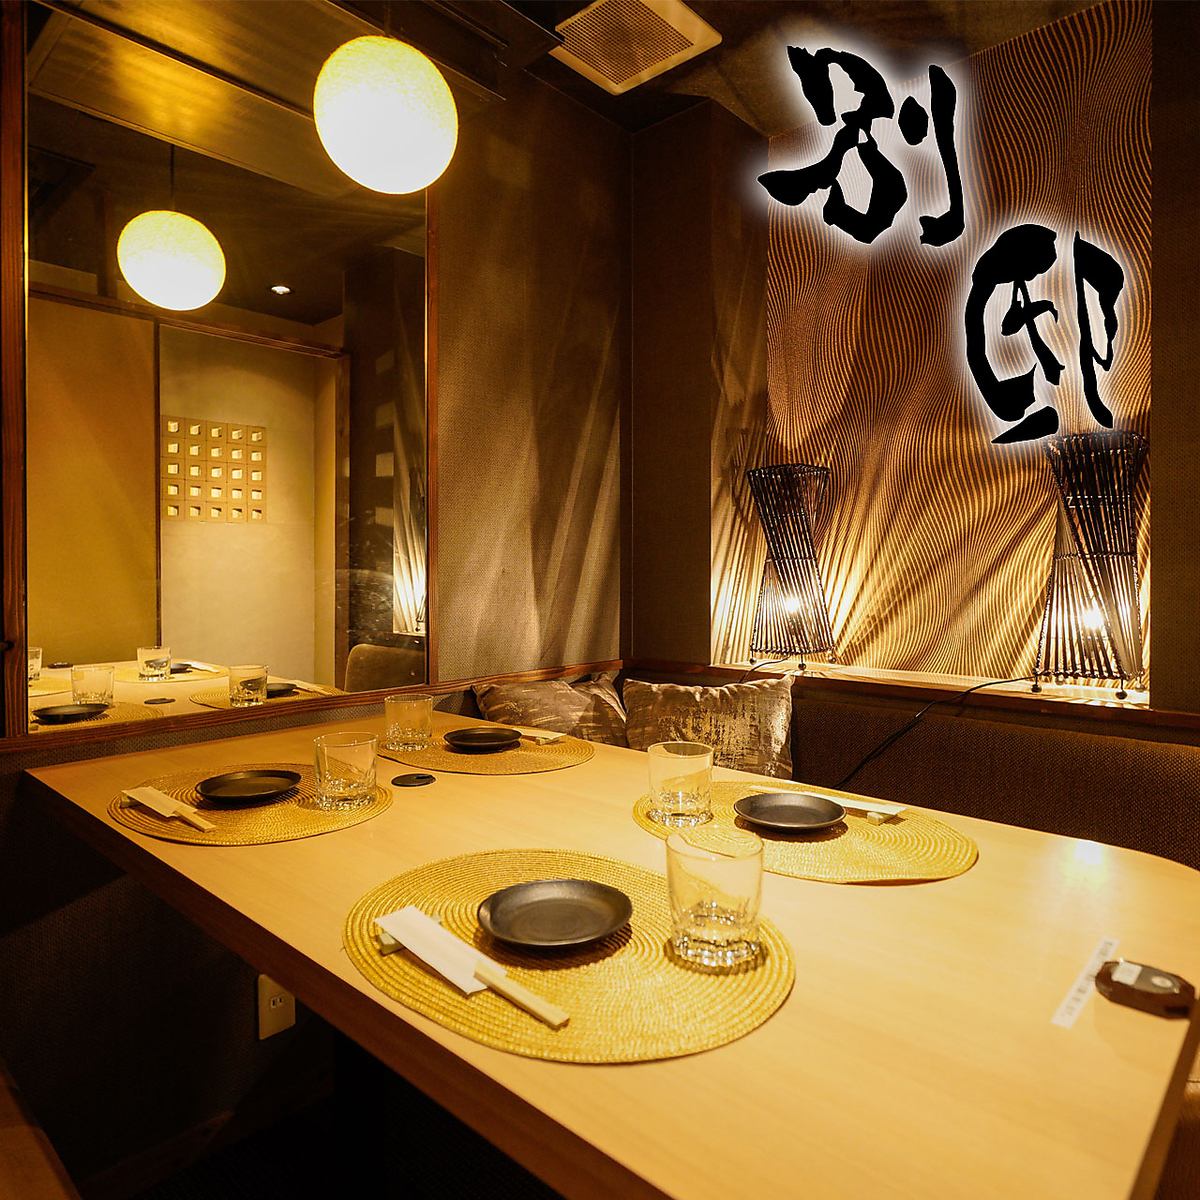 1 minute walk from the station! A hidden private izakaya that boasts yakitori and vegetable wrapped skewers ♪ Banquets with all-you-can-drink from 3,000 yen